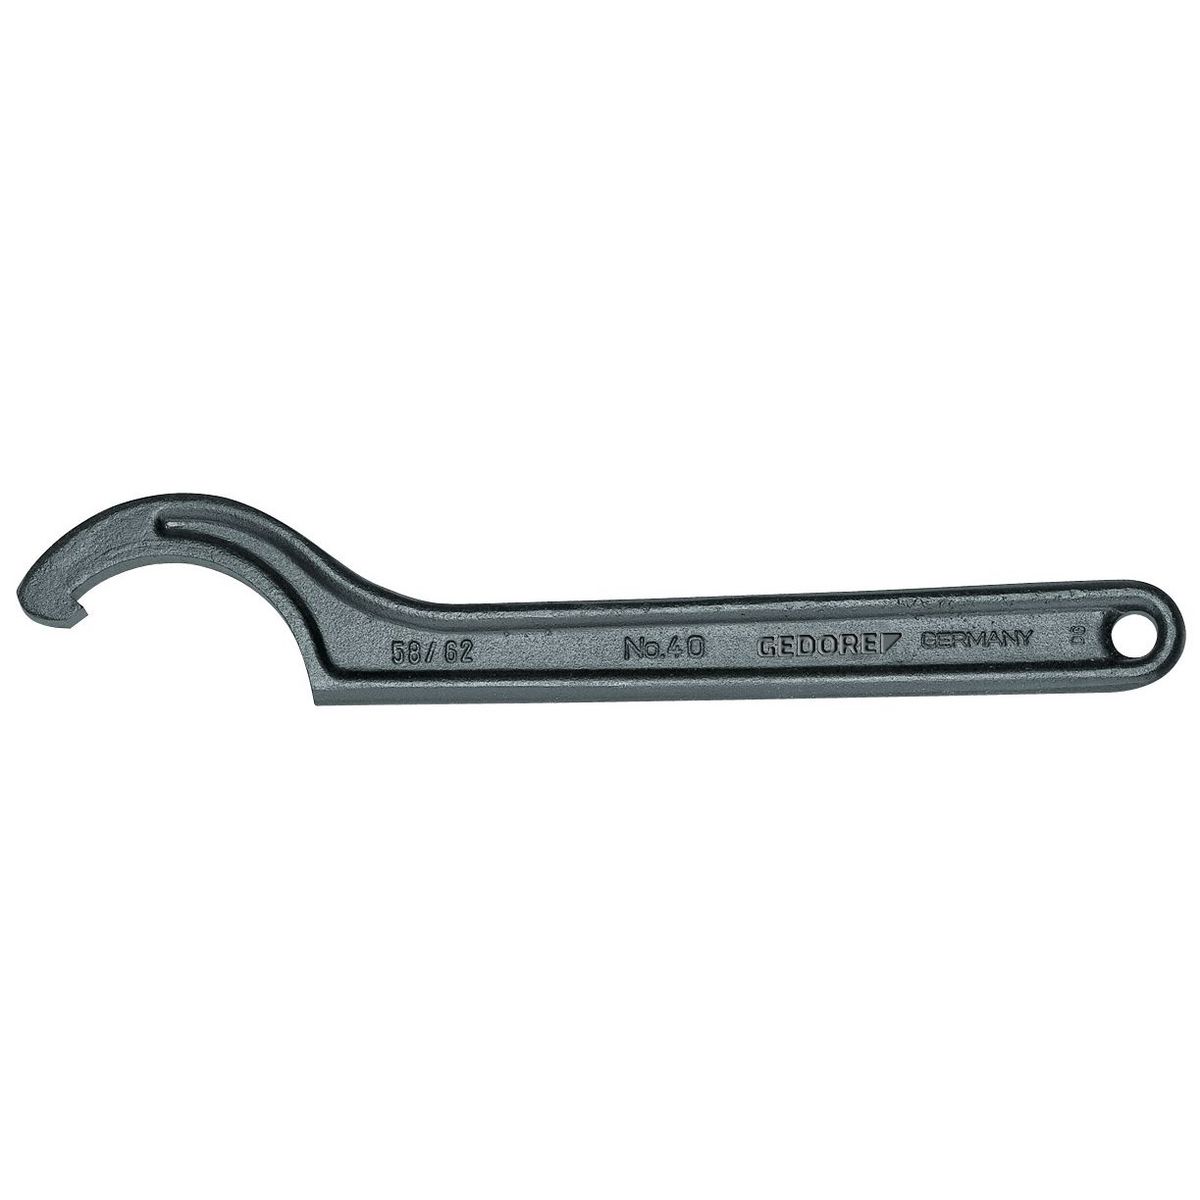 Hook wrench with lug, 110-115mm No.40 110-115 Gedore